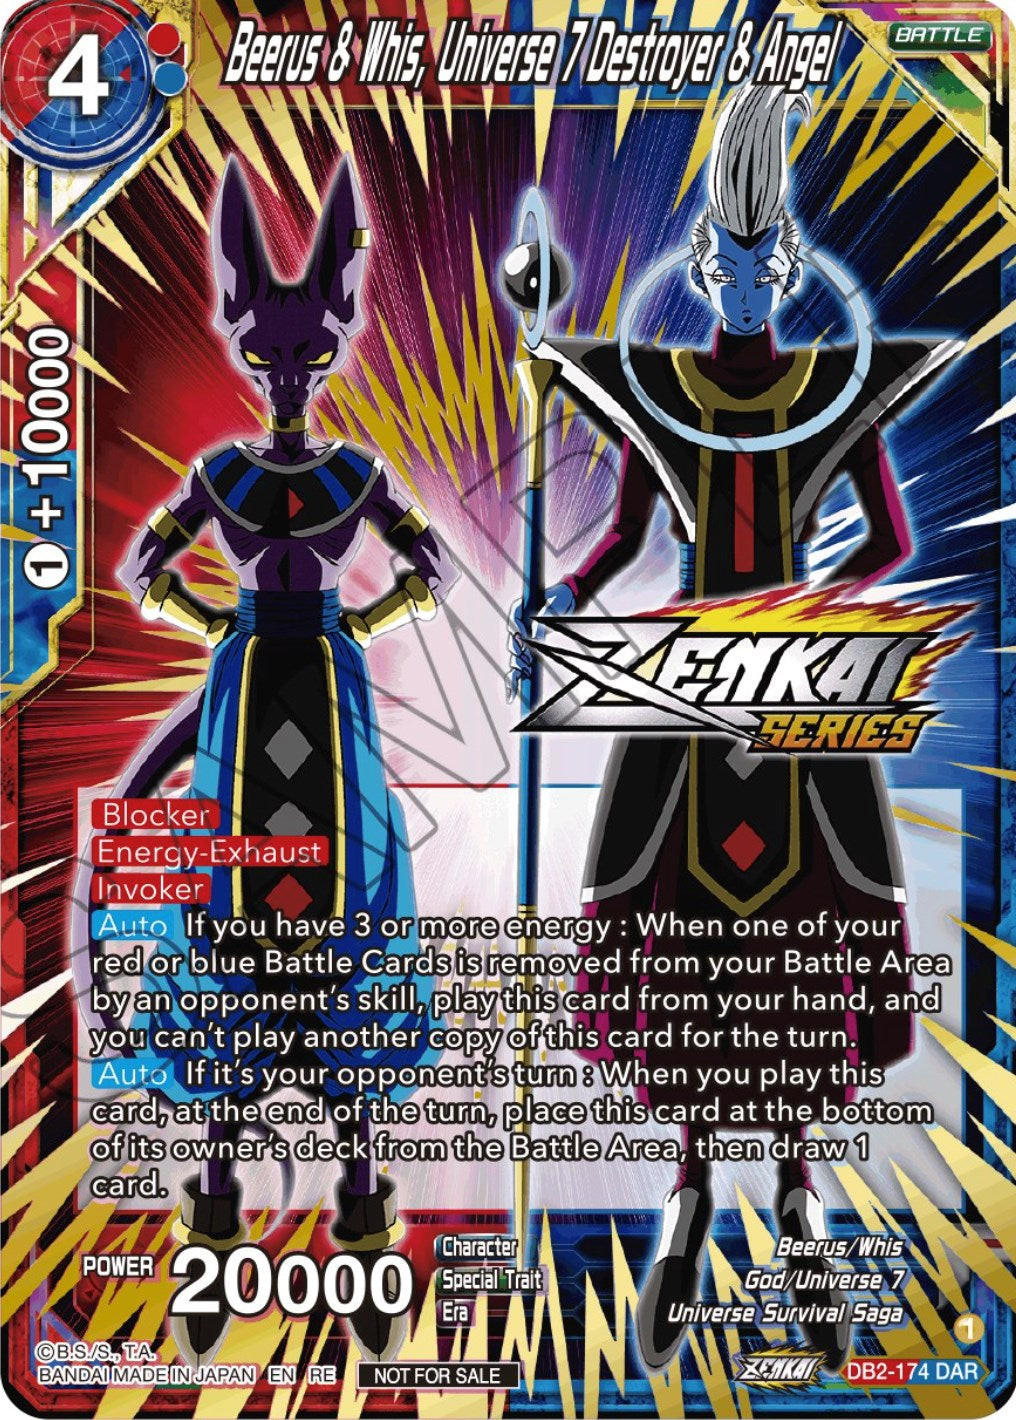 Beerus & Whis, Universe 7 Destroyer & Angel (Event Pack 12) (DB2-174) [Tournament Promotion Cards] | Sanctuary Gaming